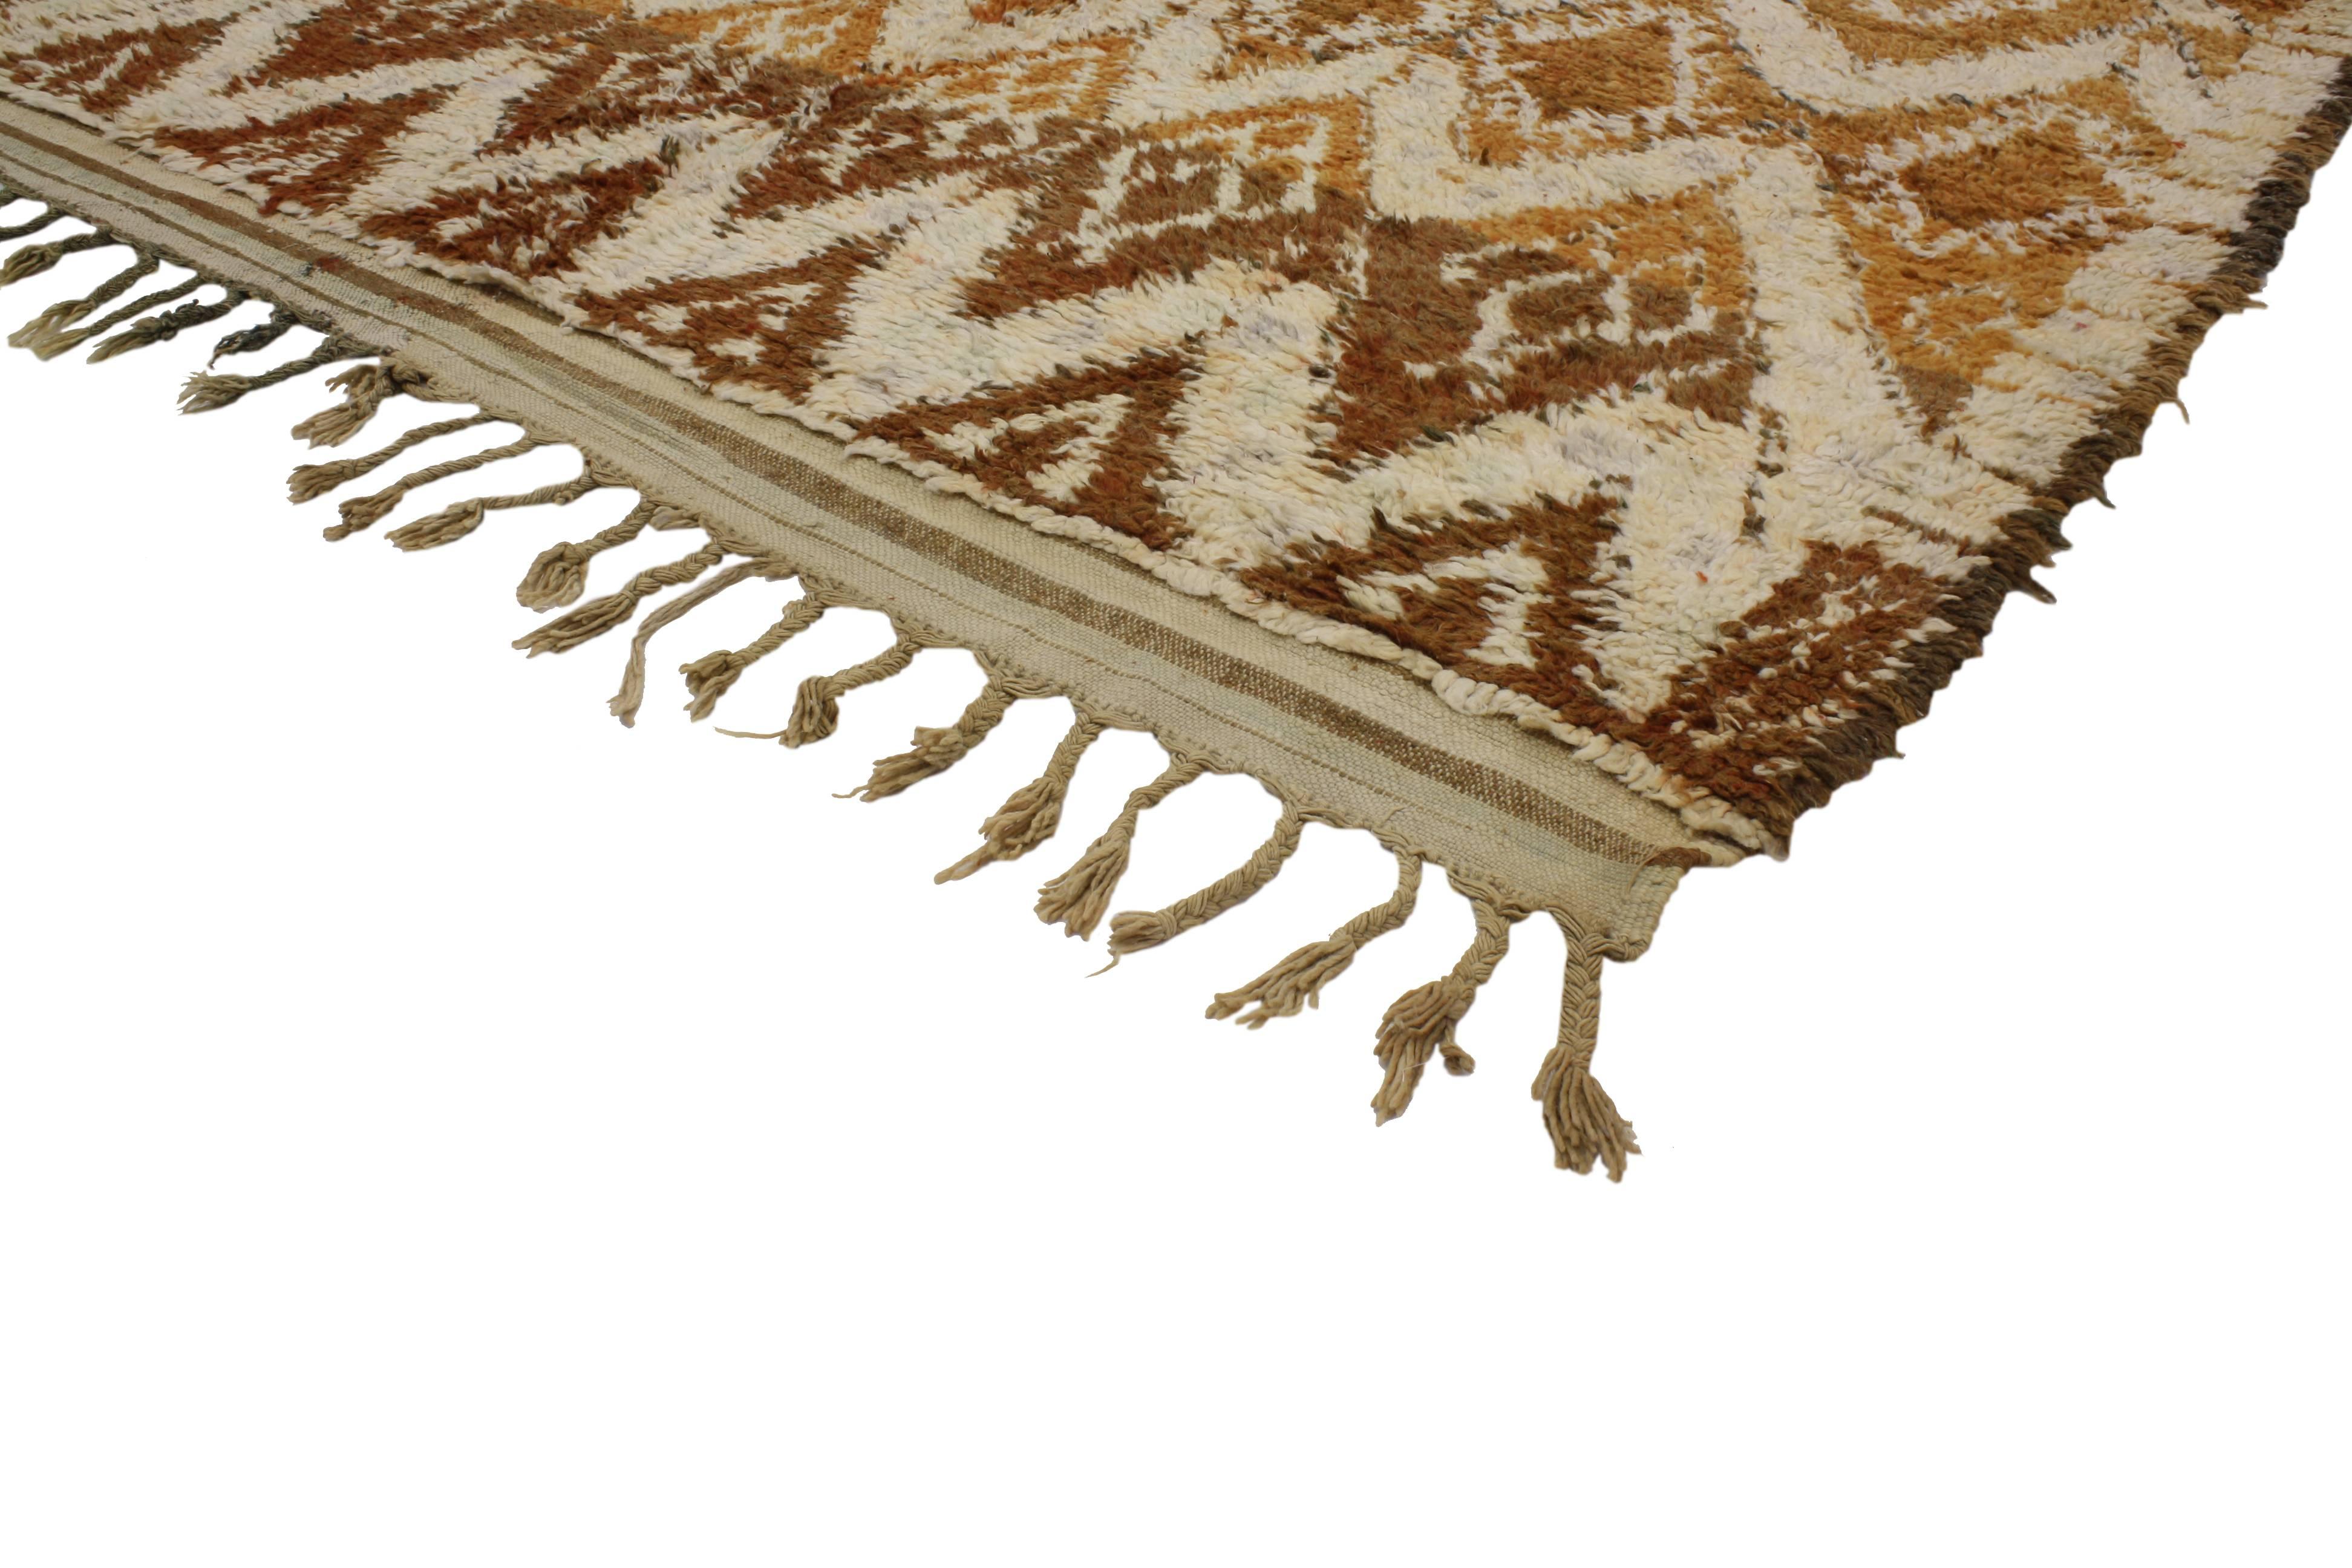 This vintage Berber Moroccan rug features Mid-Century Modern style. Rendered in variegated shades of brown, rust, saffron gold, beige and cream. Displaying a unique repetitive and random diamond pattern. With its plush pile from hand-knotted wool,